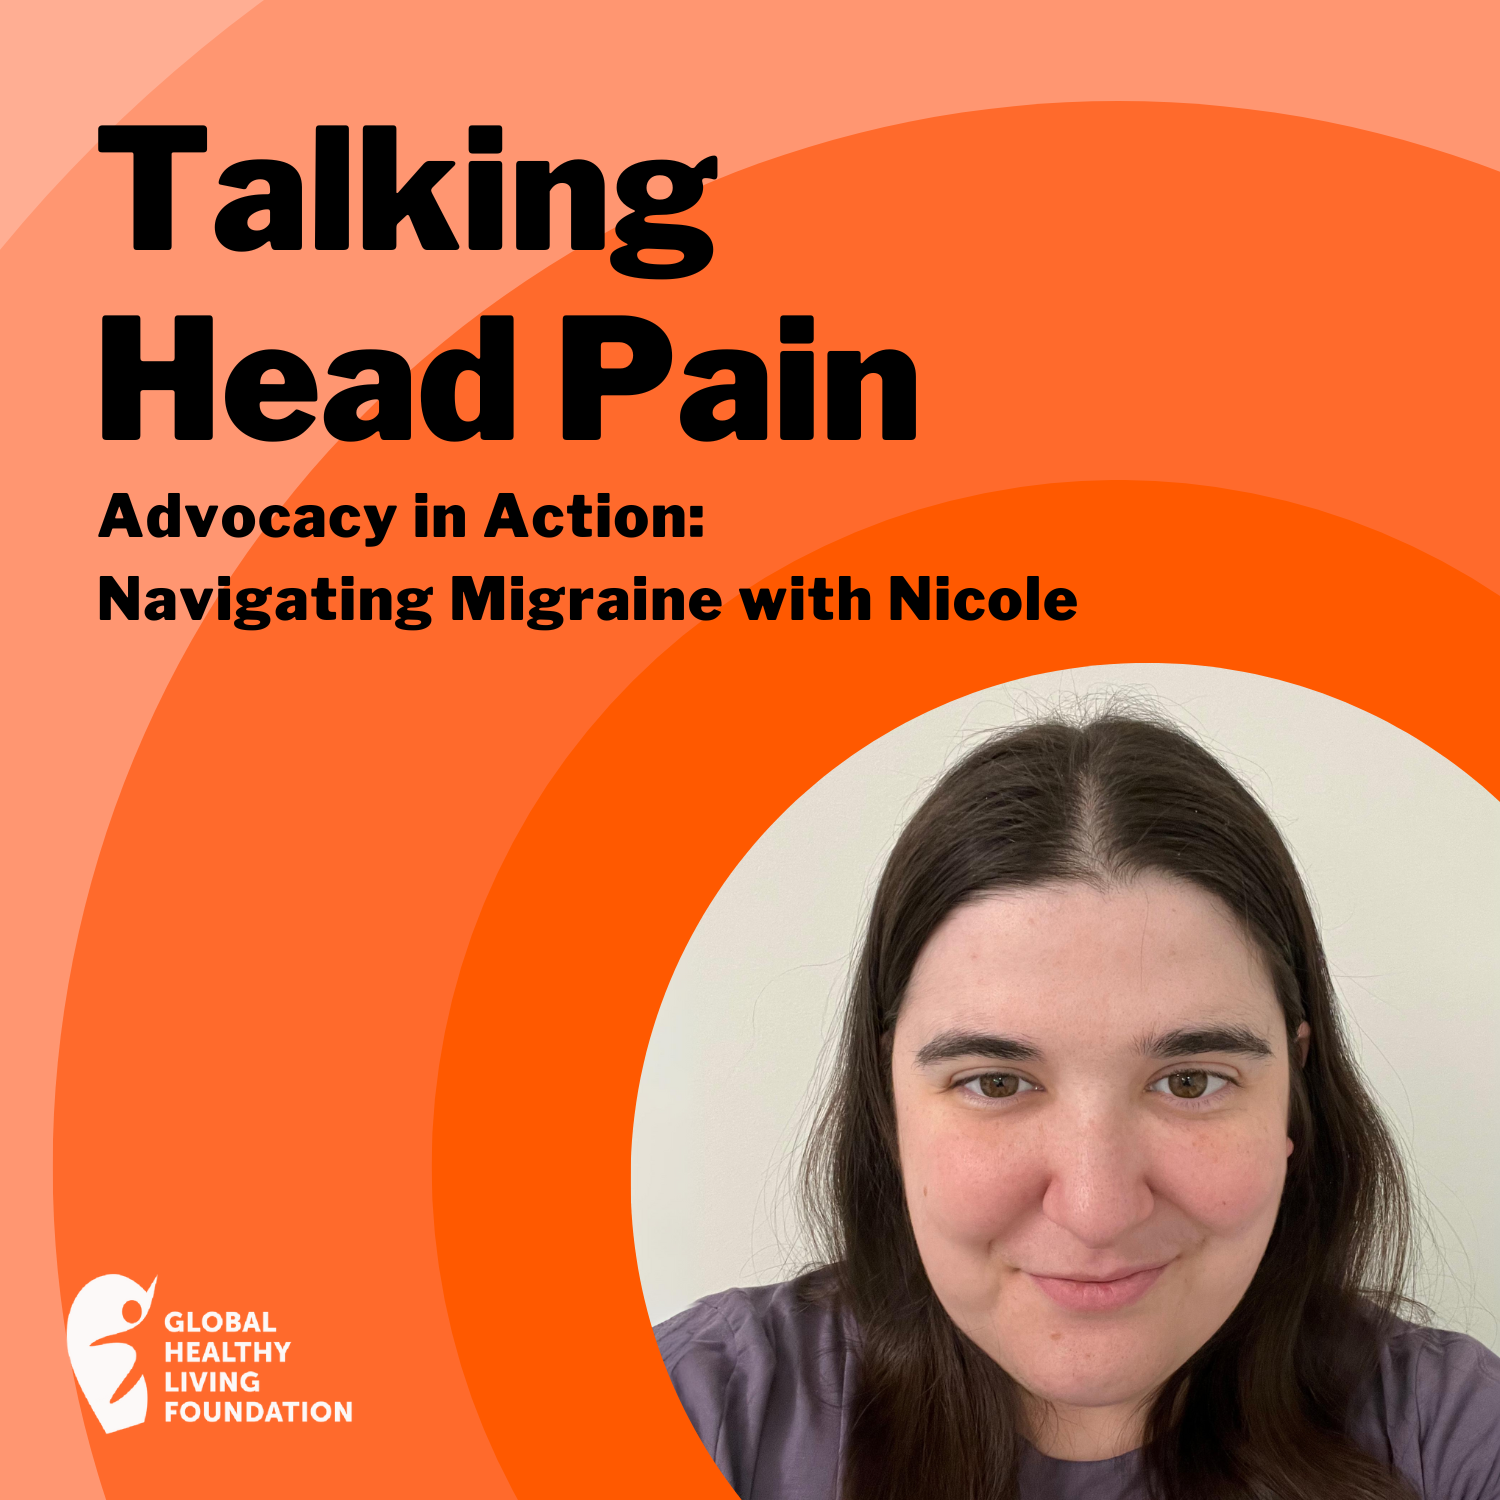 Advocacy in Action: Navigating Migraine with Nicole